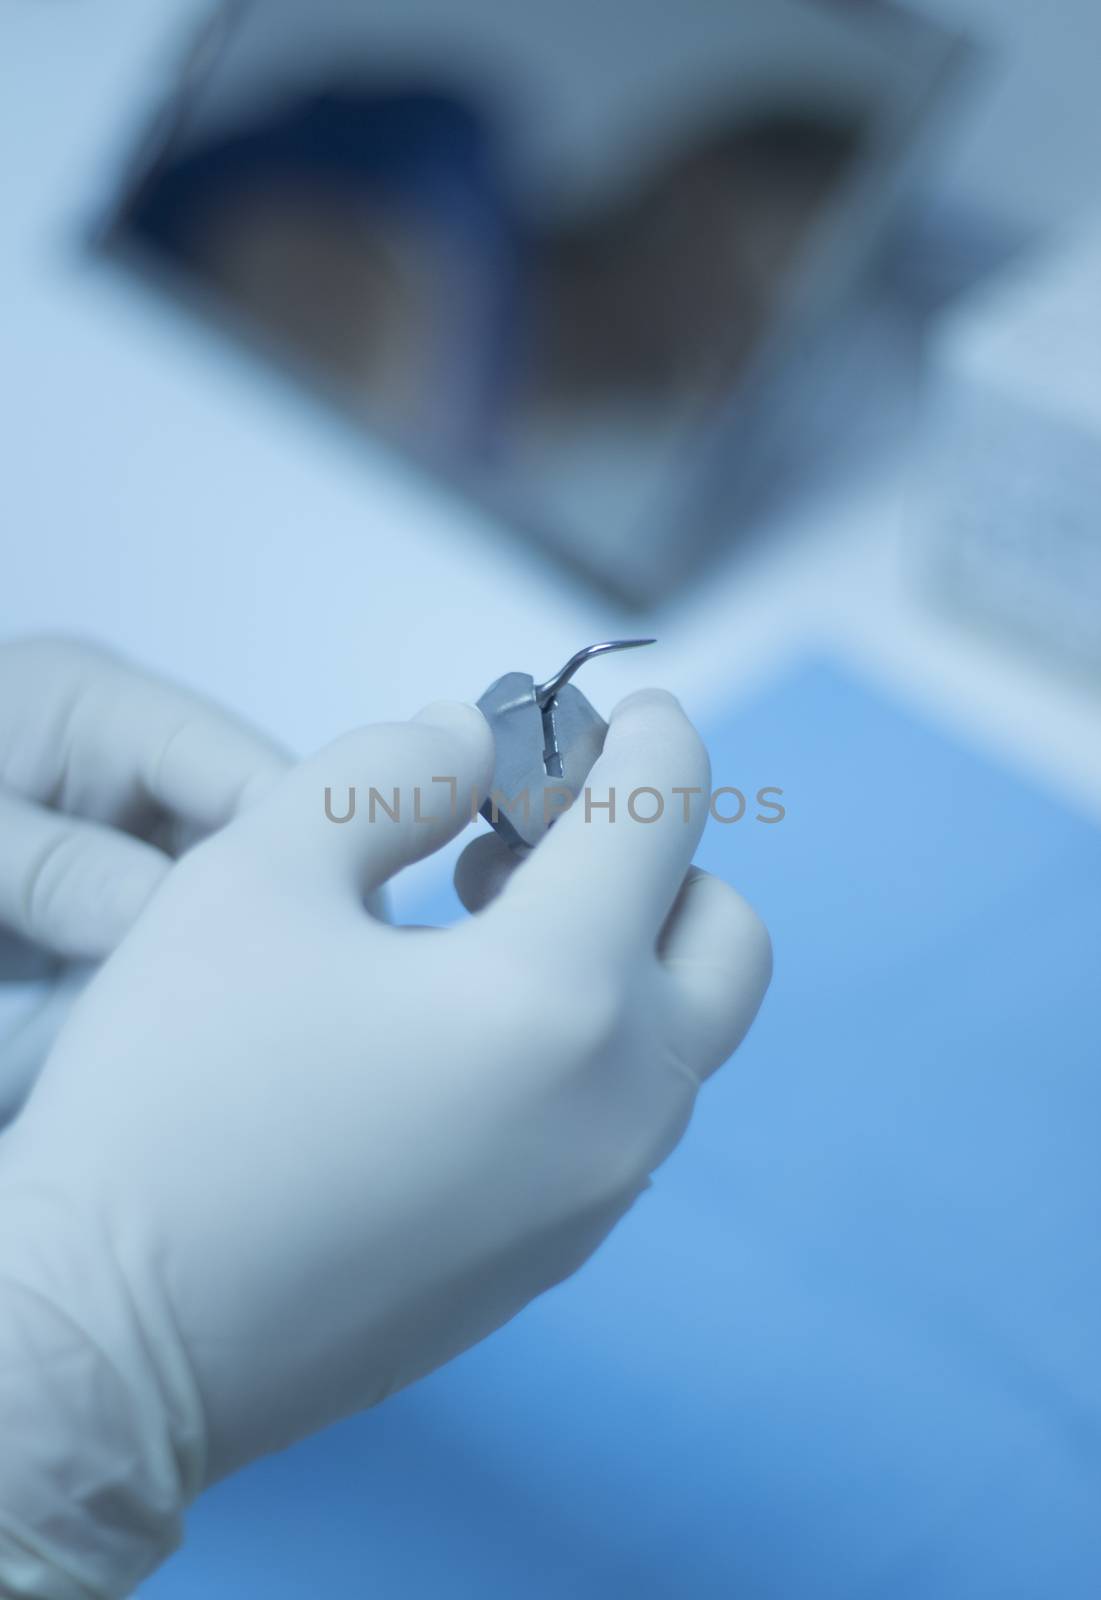 Hands of dental nurse in dental surgery clinic in white surgical sterile gloves attaching ultrasound teeth cleaning attachment prior to patient tooth clean treatment session by the dentist. 